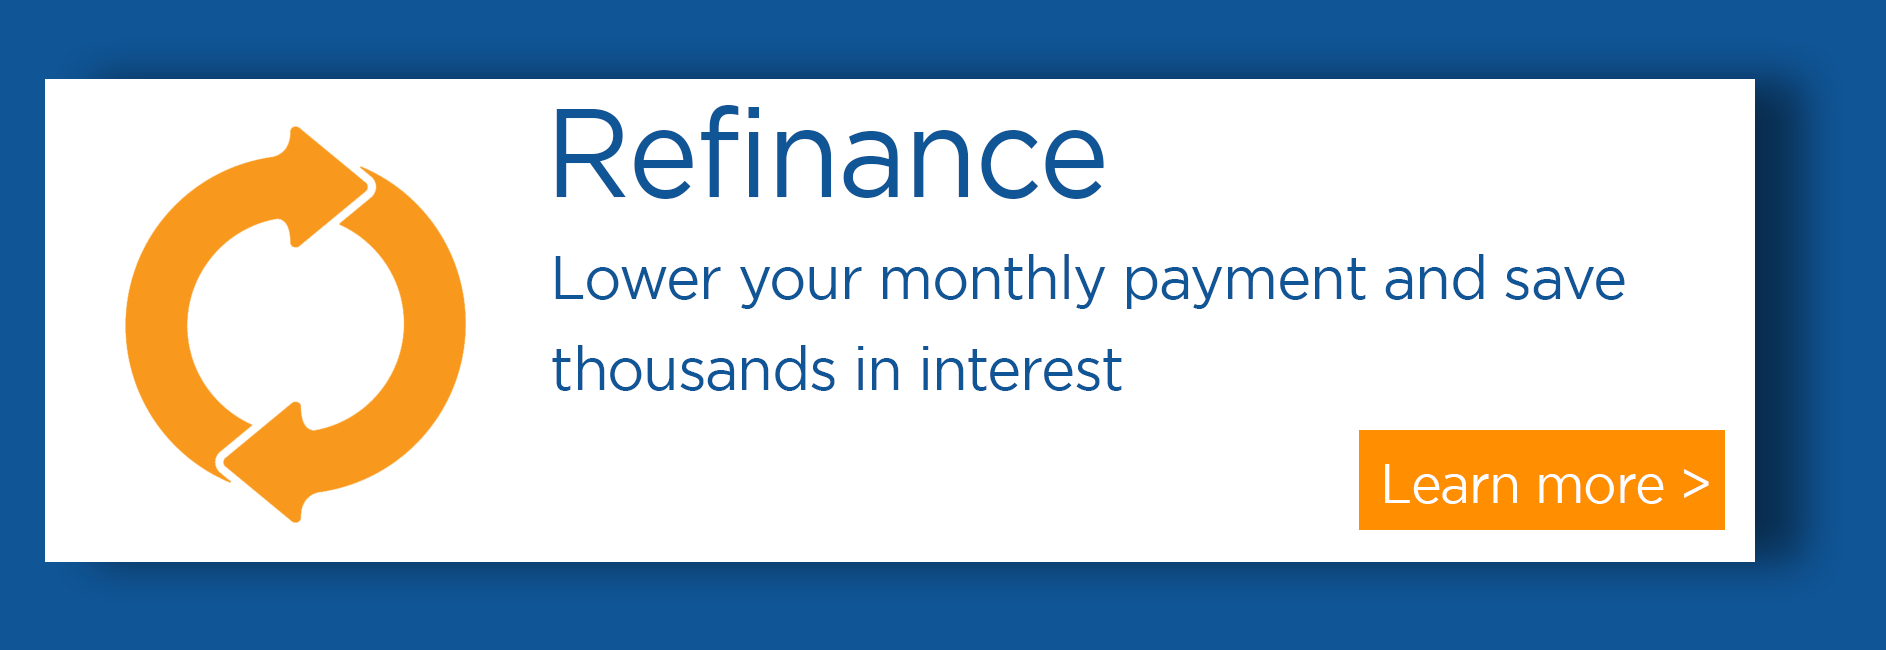 refinance your home and save with Central Sunbelt